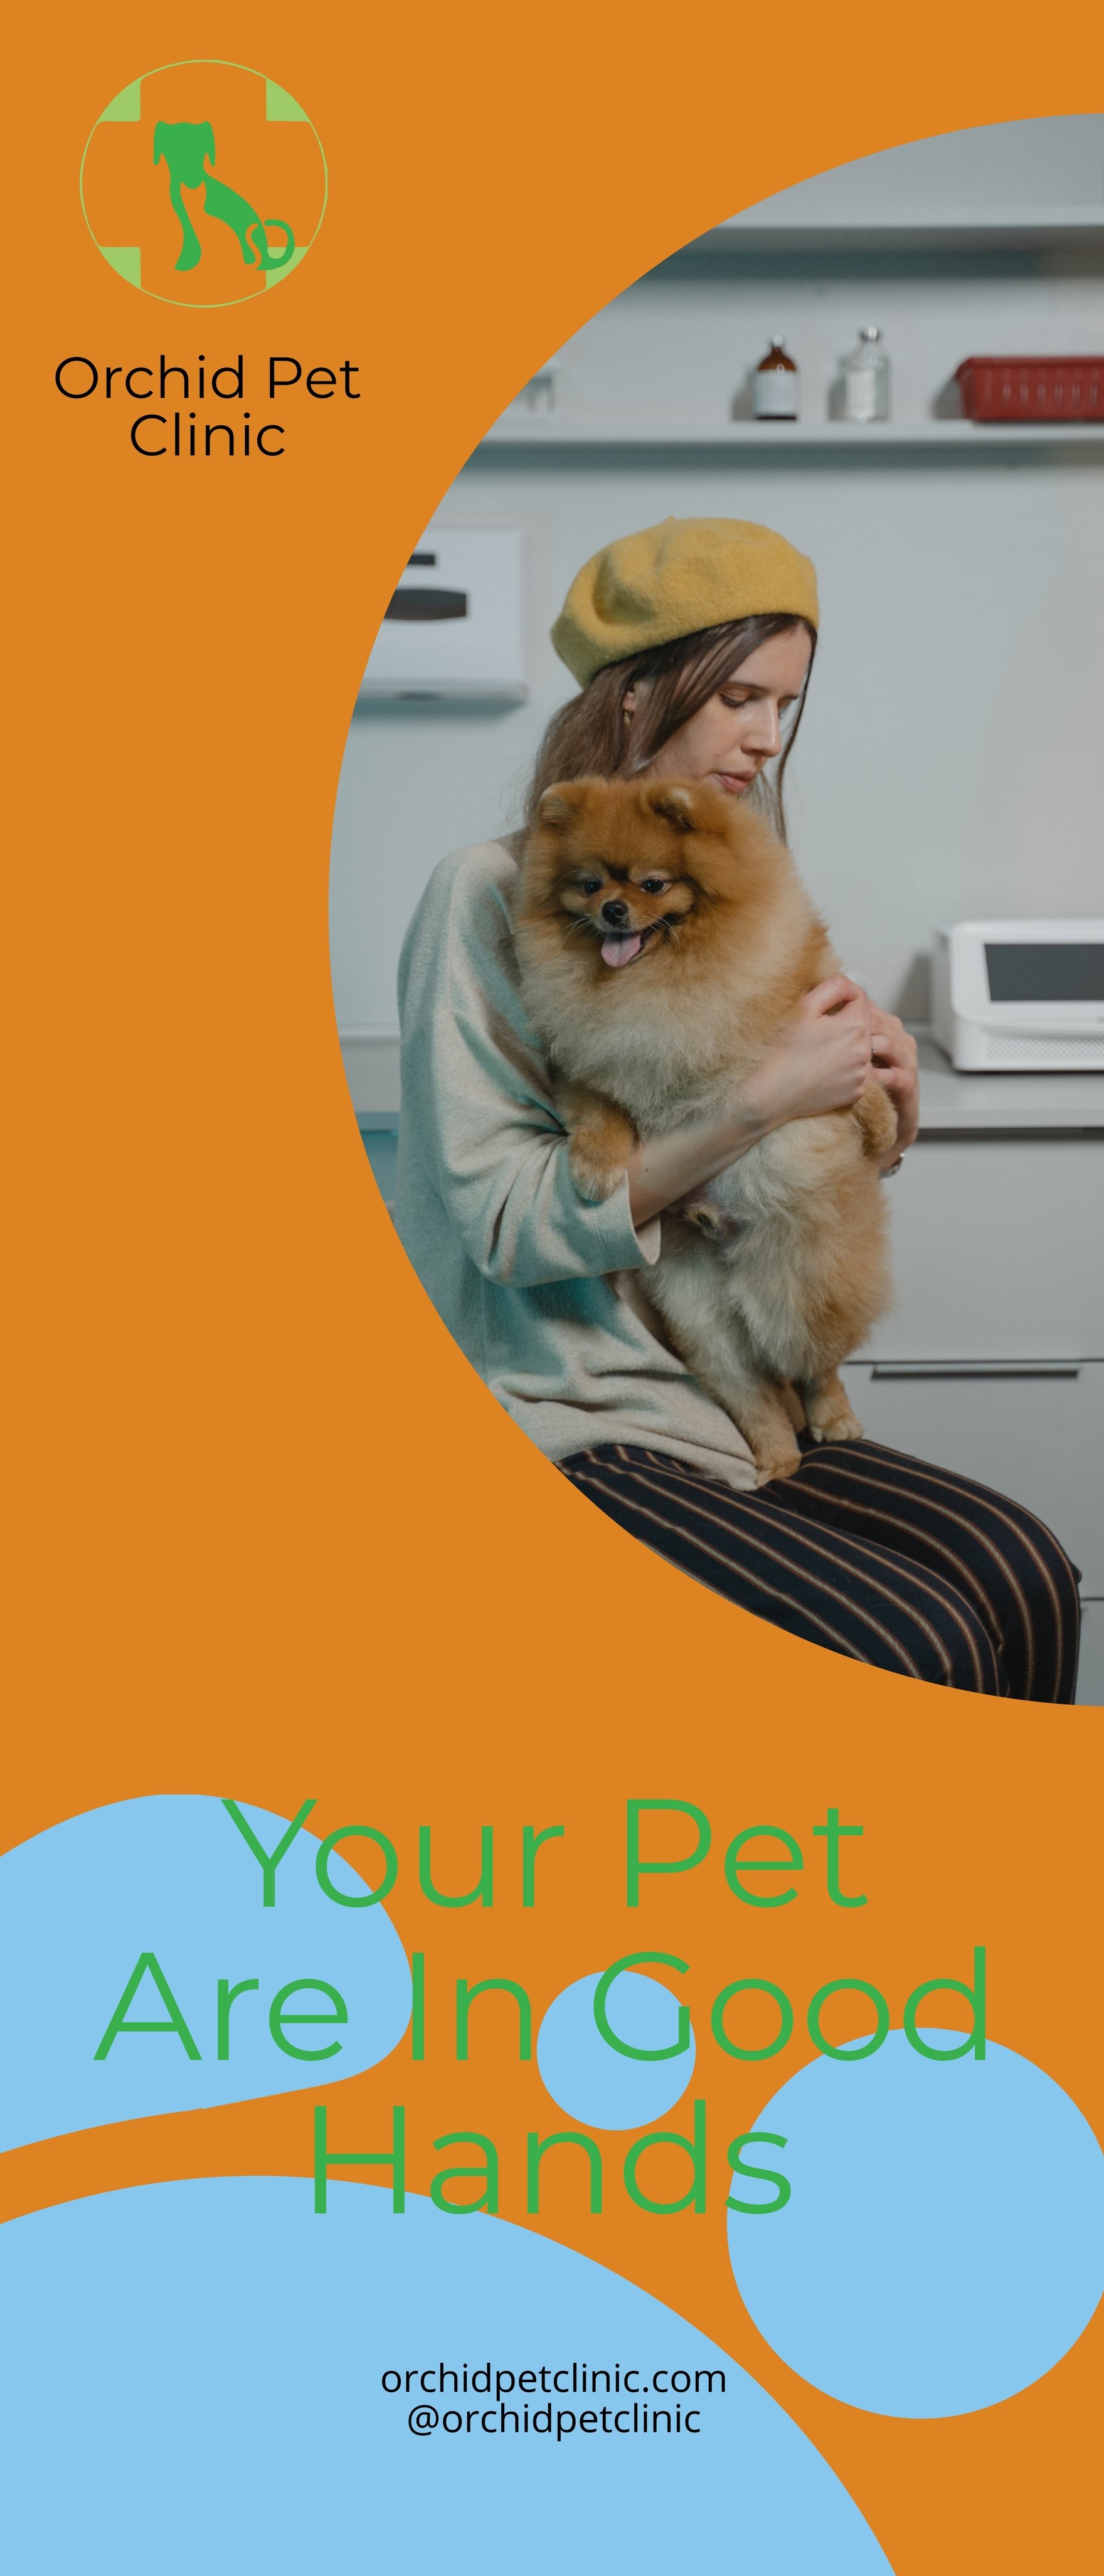 Free Veterinarian Clinic Advertising Roll Up Banner Template in Word, Google Docs, Illustrator, PSD, Apple Pages, Publisher